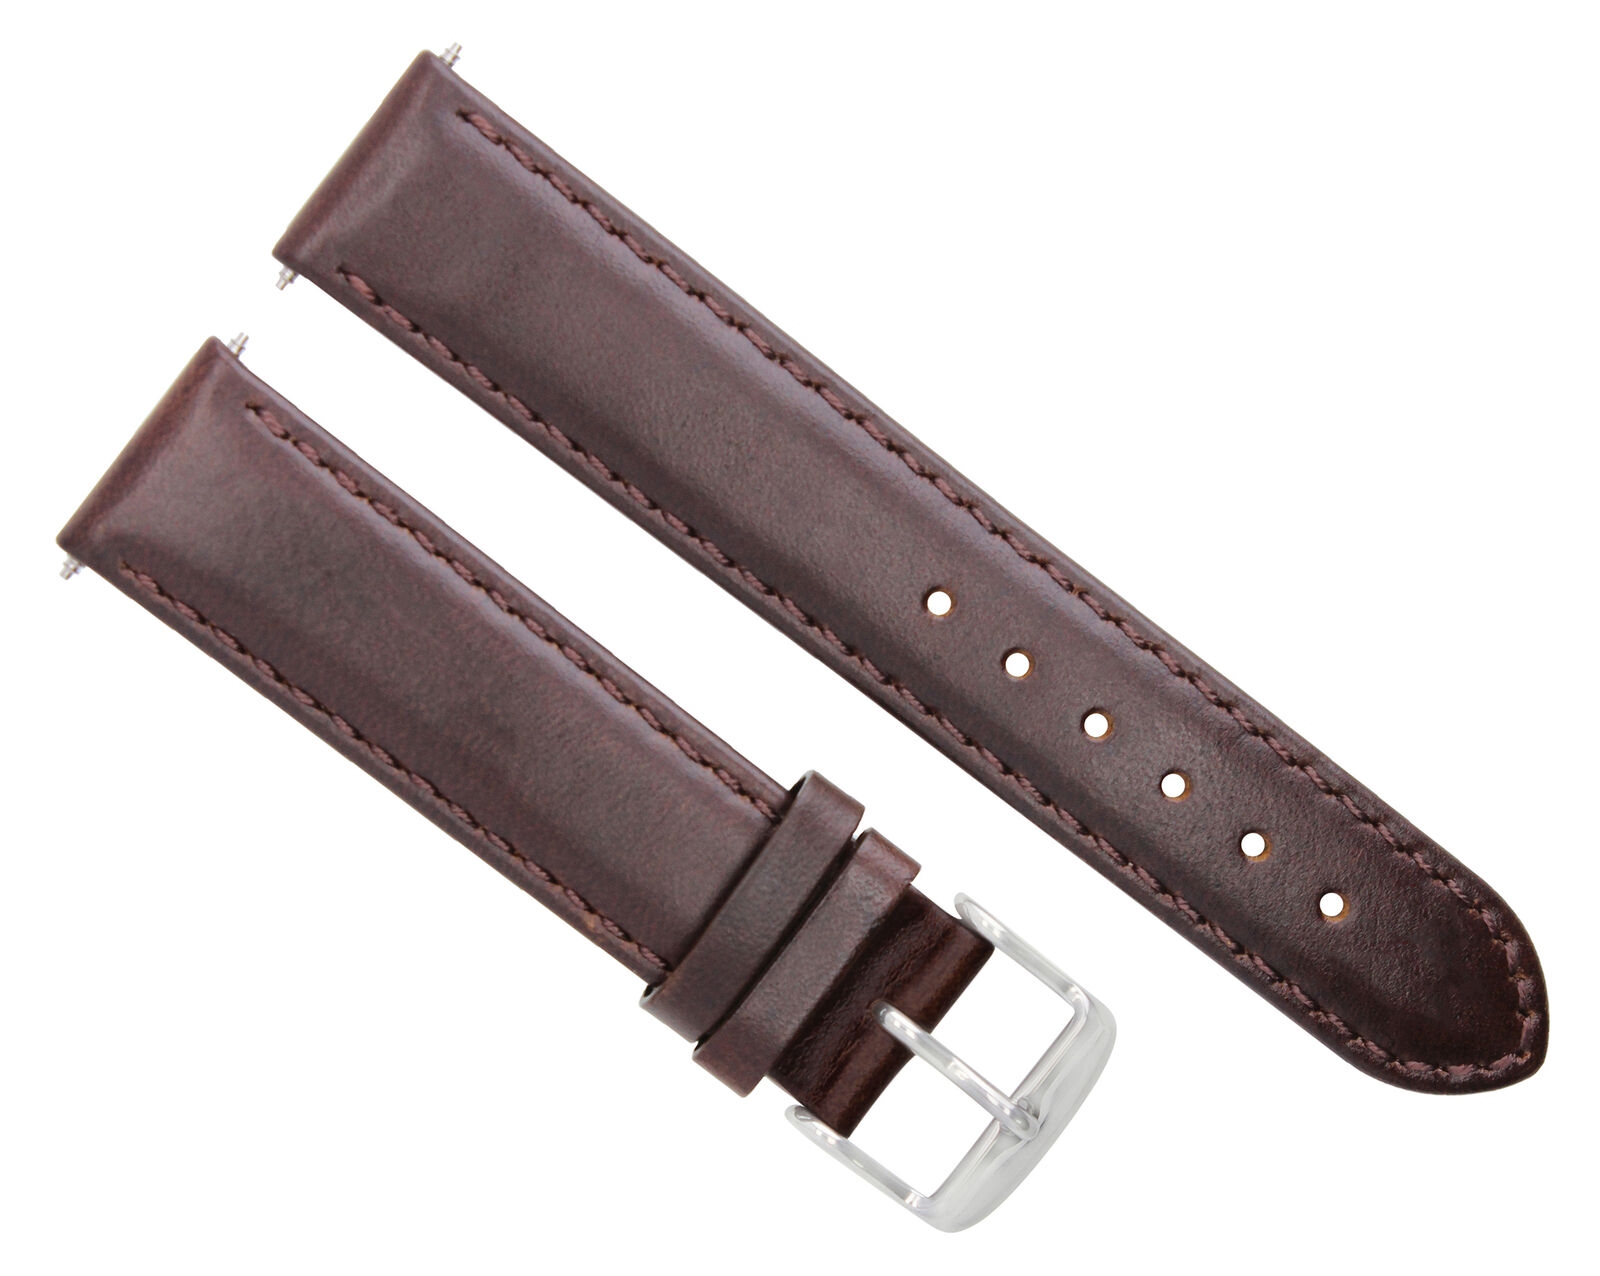 24MM SMOOTH LEATHER WATCH STRAP BAND FOR 44MM PANERAI LUMINOR WA